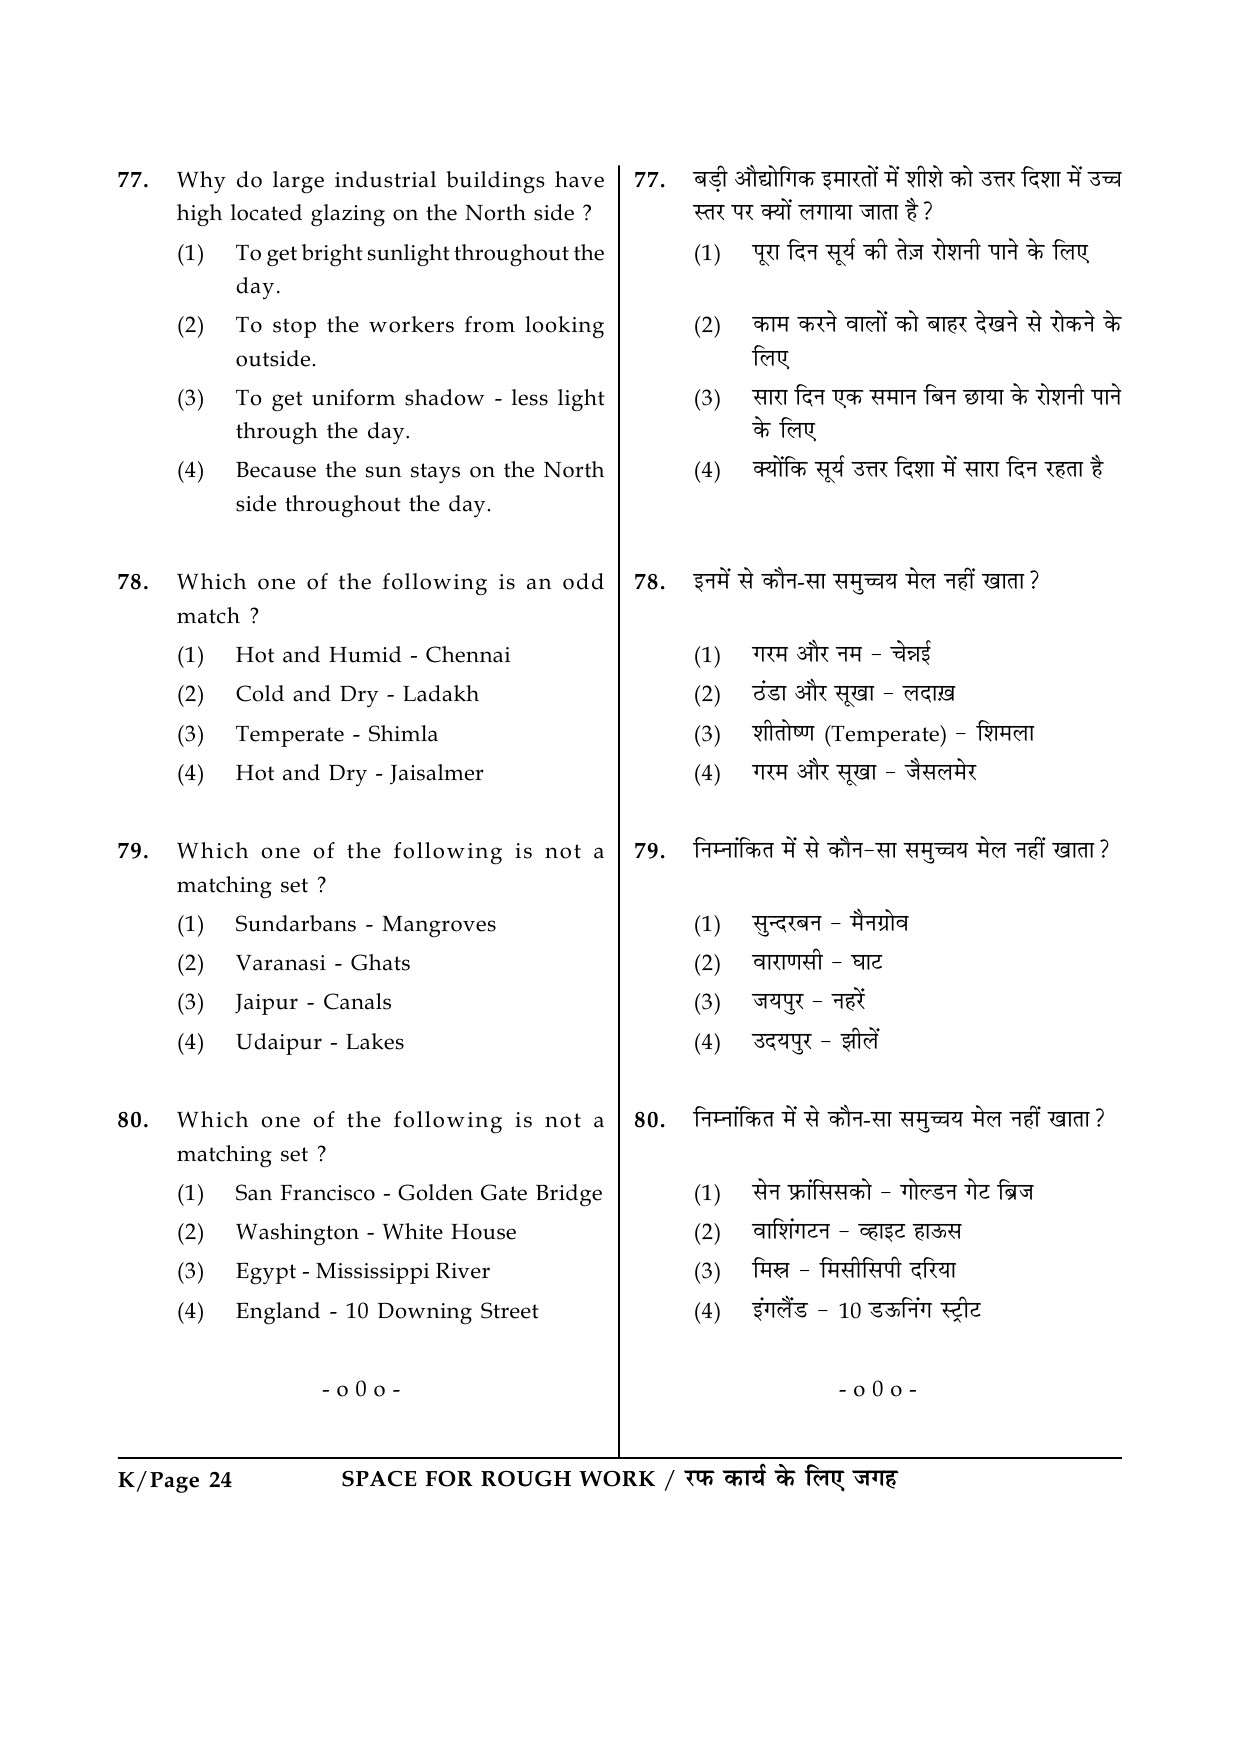 JEE Main Exam Question Paper 2015 Booklet K 24